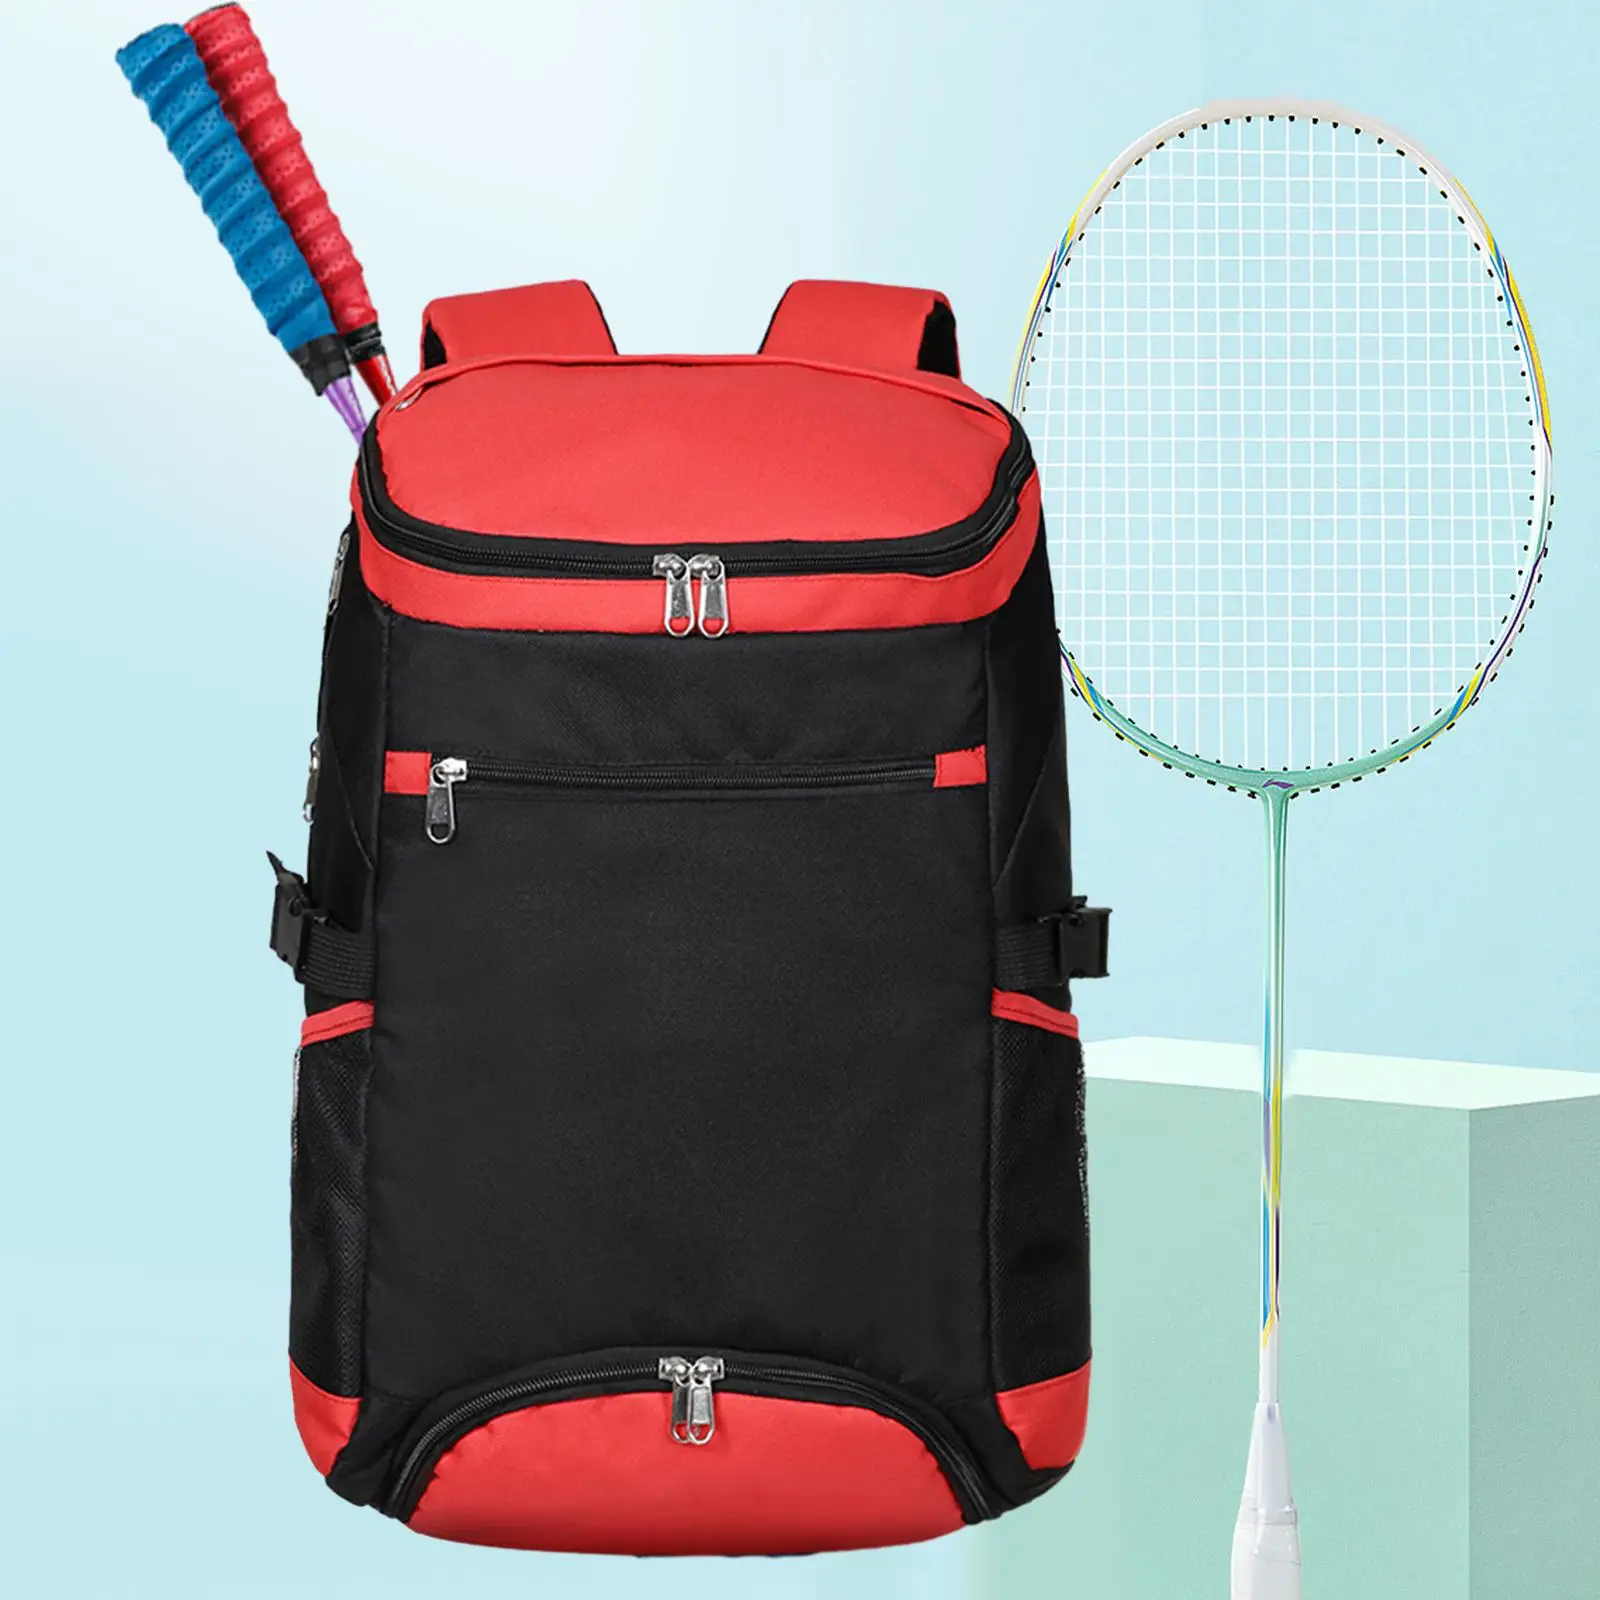 Tennis Backpack Large Capacity Backpack Racket Bag for Badminton Squash Racquets 2 Rackets Outdoor Sports Pickleball Racket